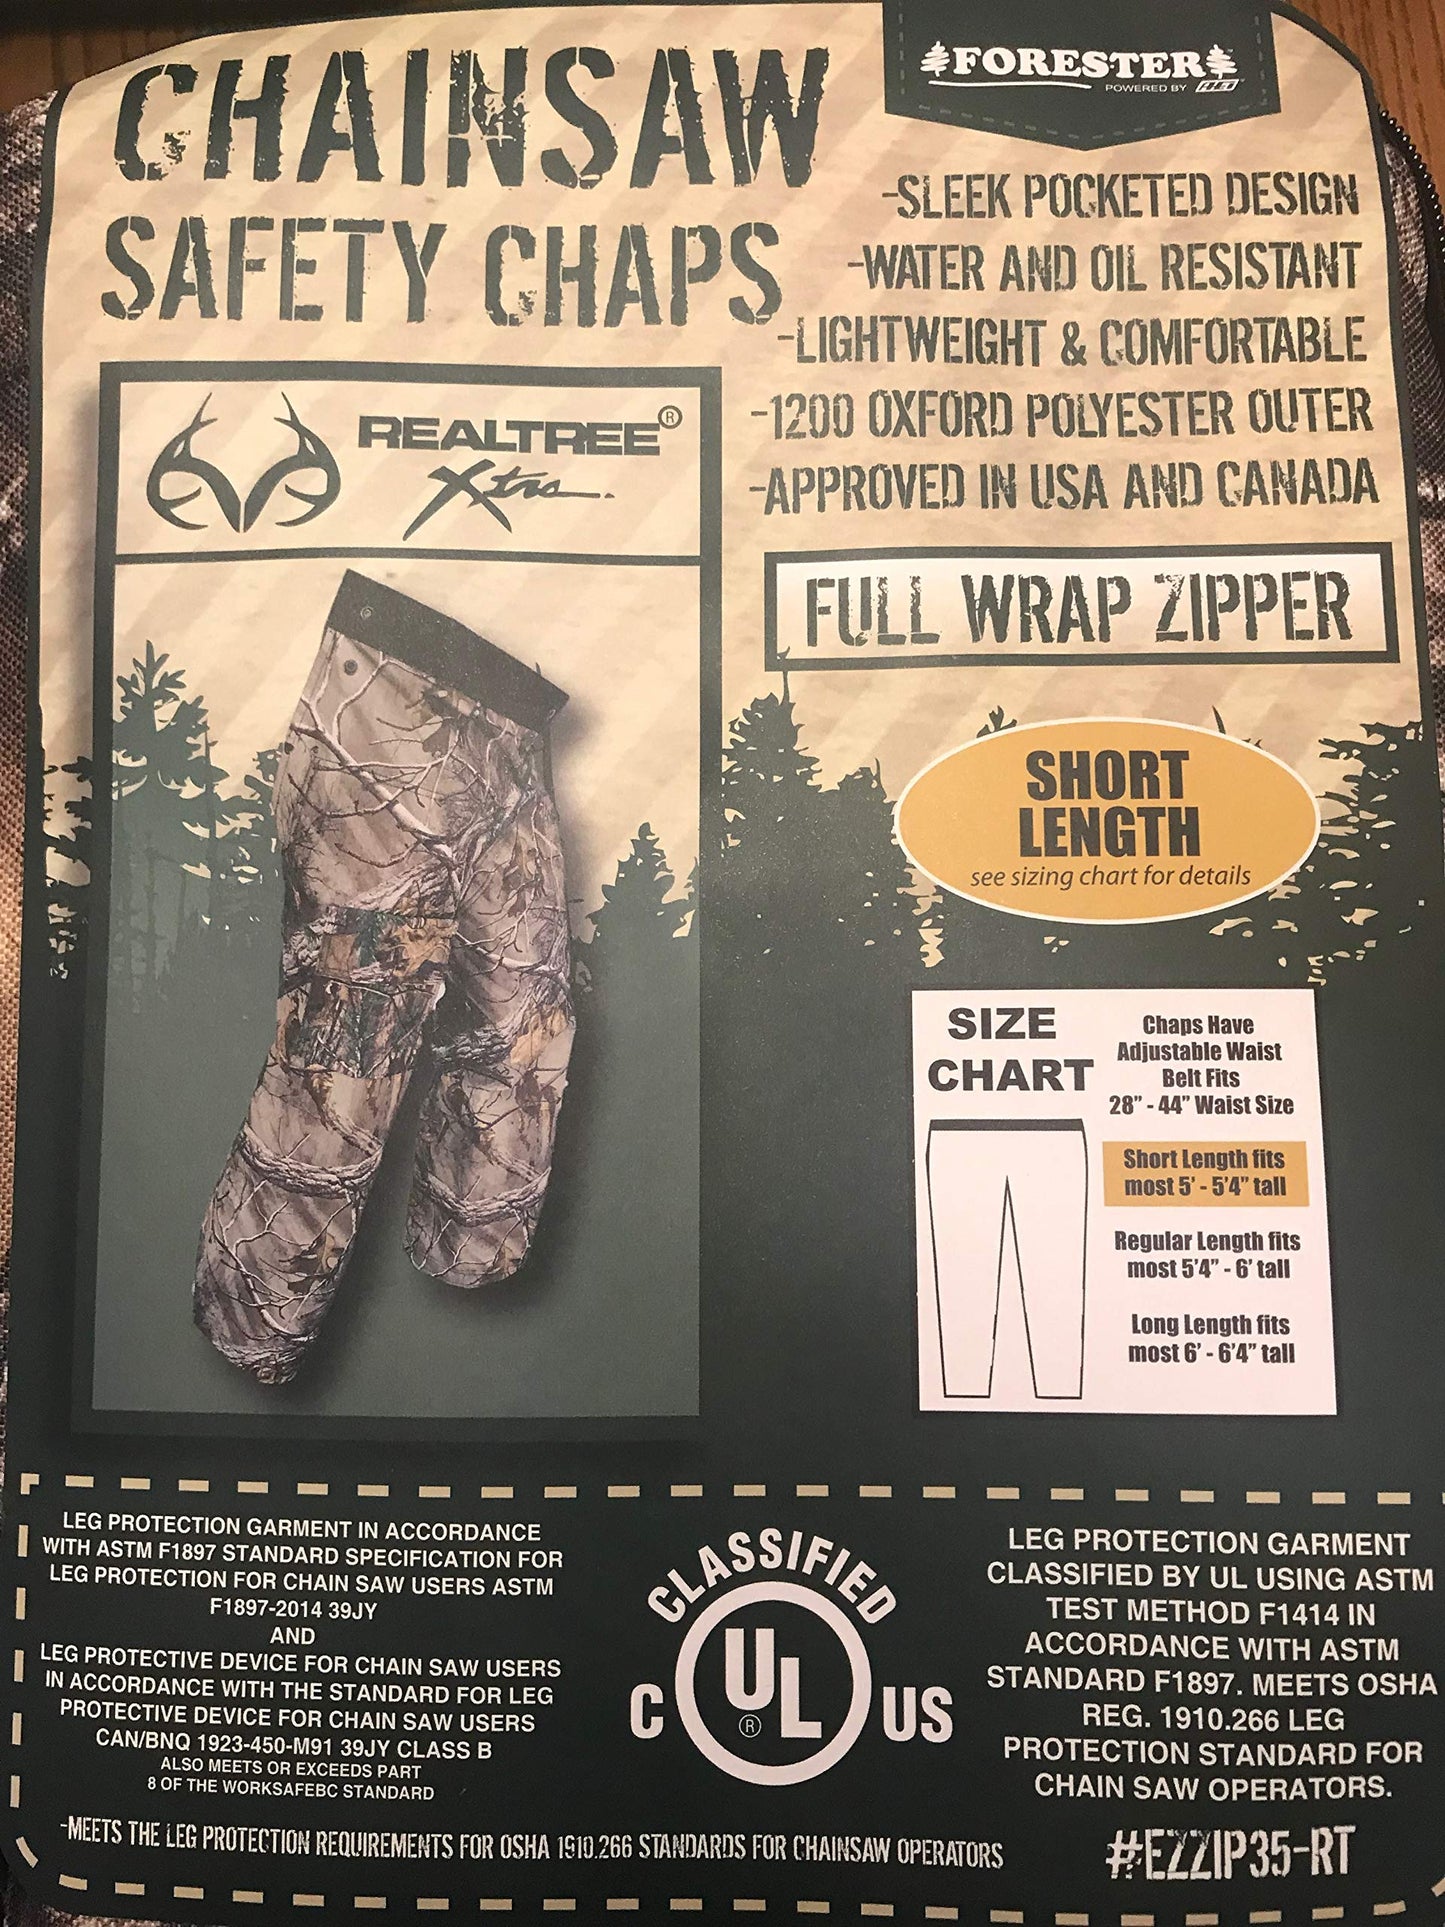 Forester Chainsaw Safety Chaps - Full Wrap Zipper - Real Tree Camo (Short (35...